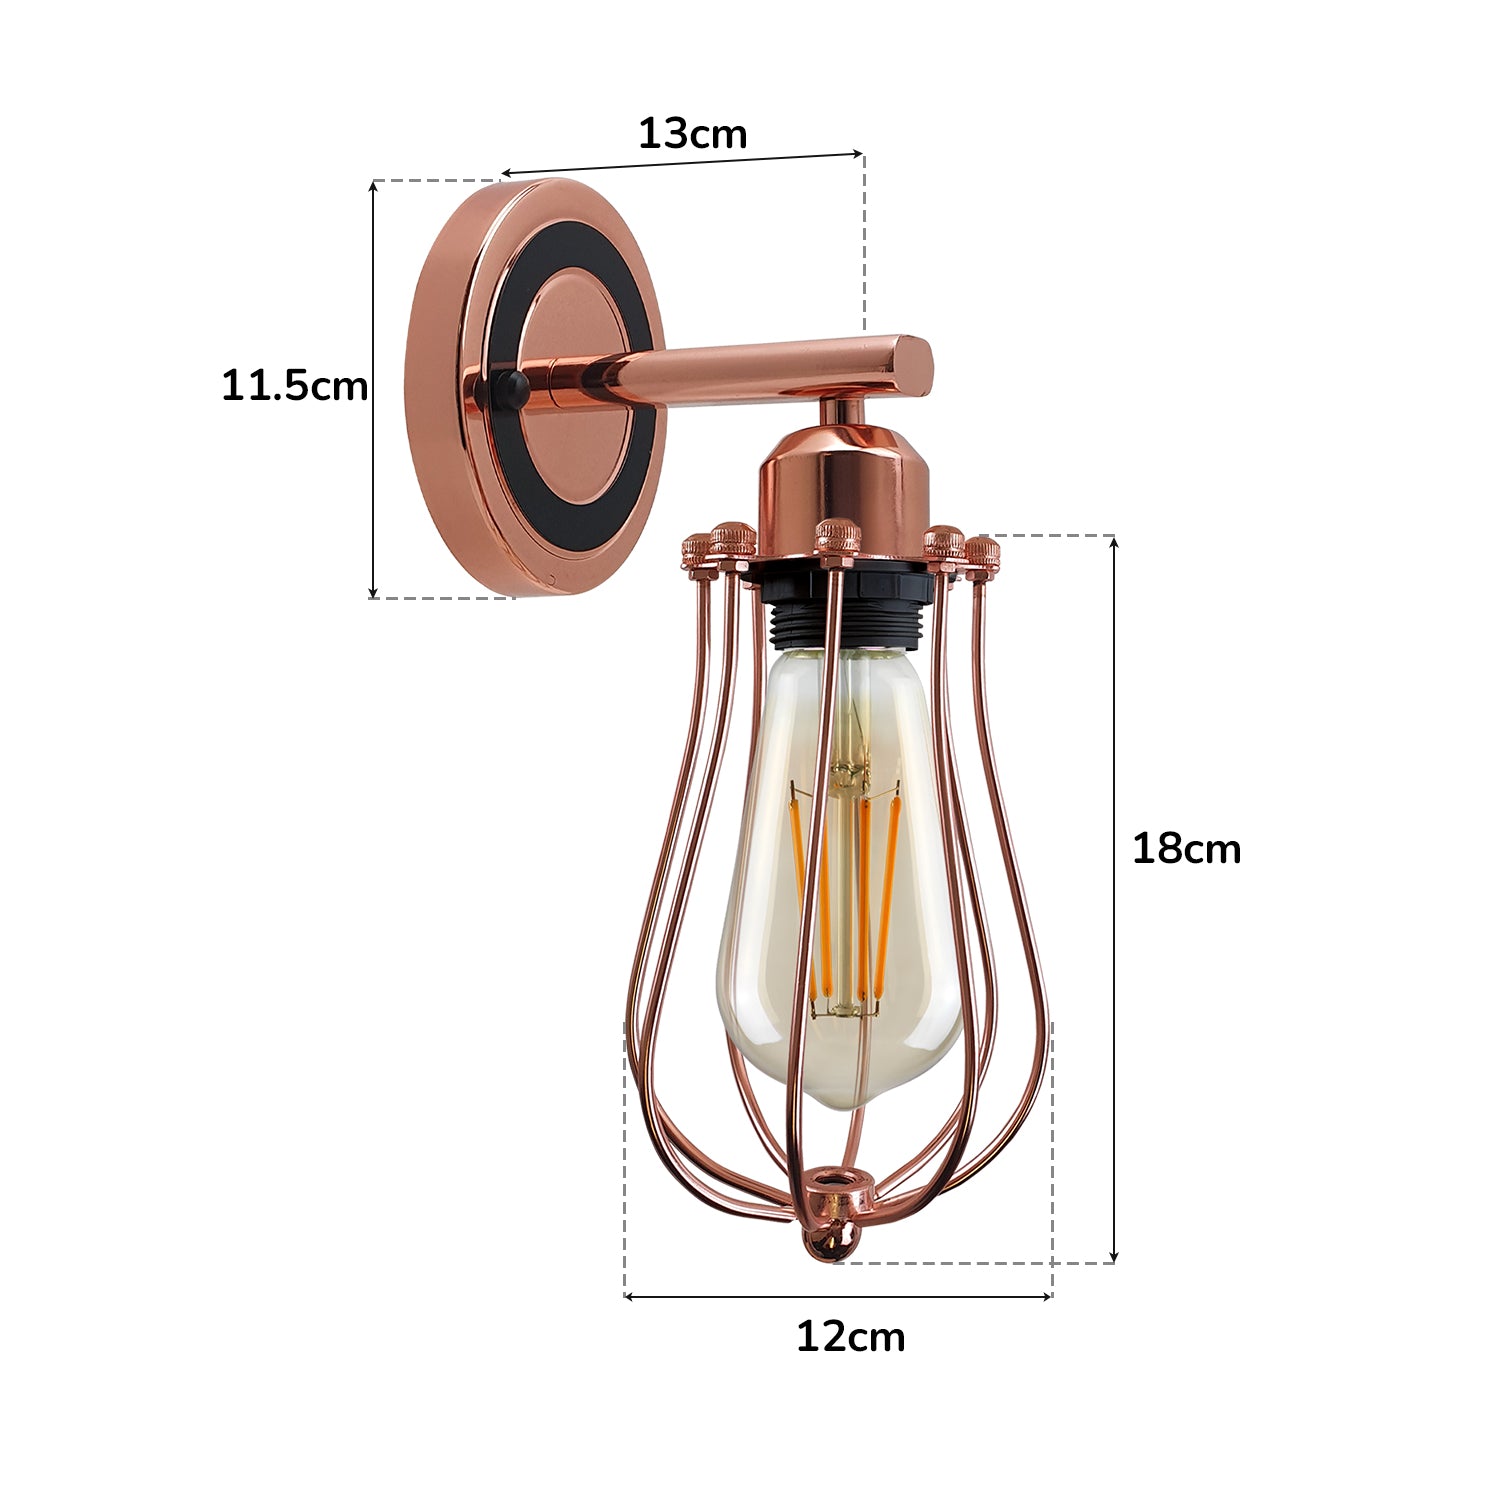 rose gold bulb guard wire cage wall lights.JPG